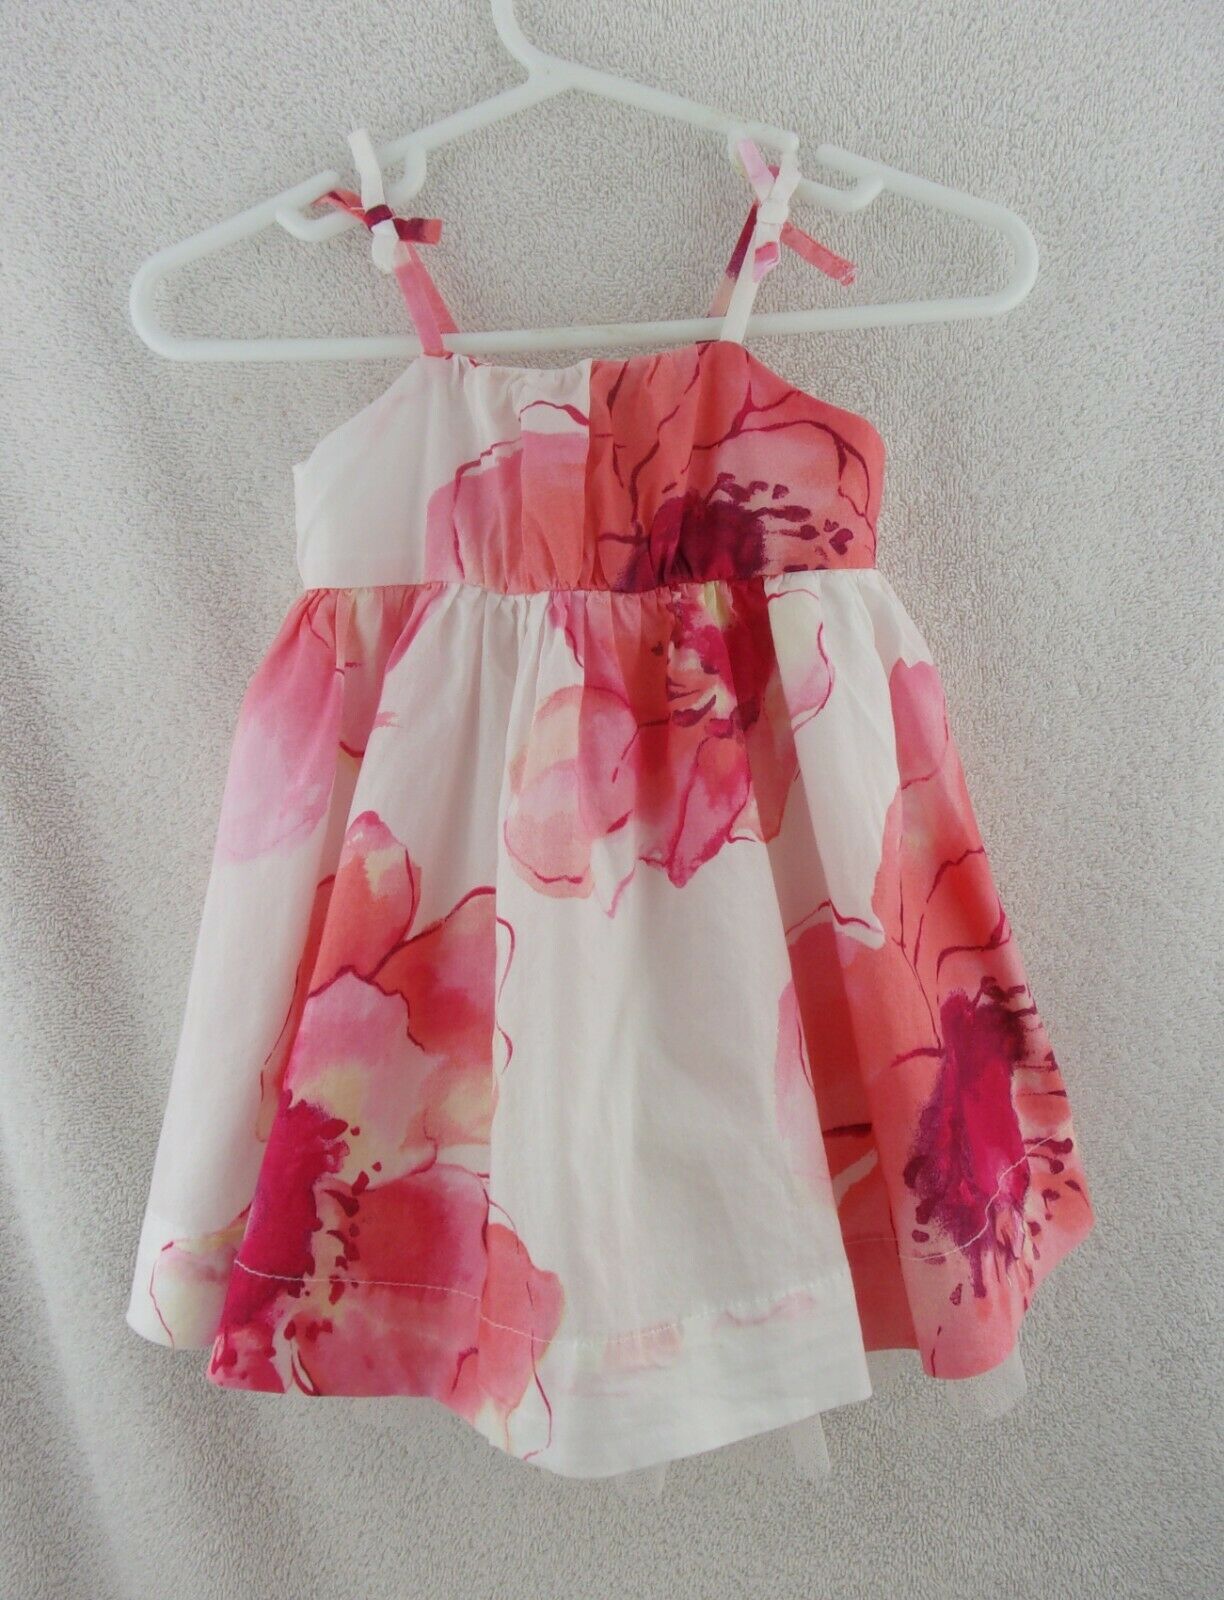 Doll Clothes Baby Gap Floral Dress 0-3 Months Infant Outfit 22"-24" Tall